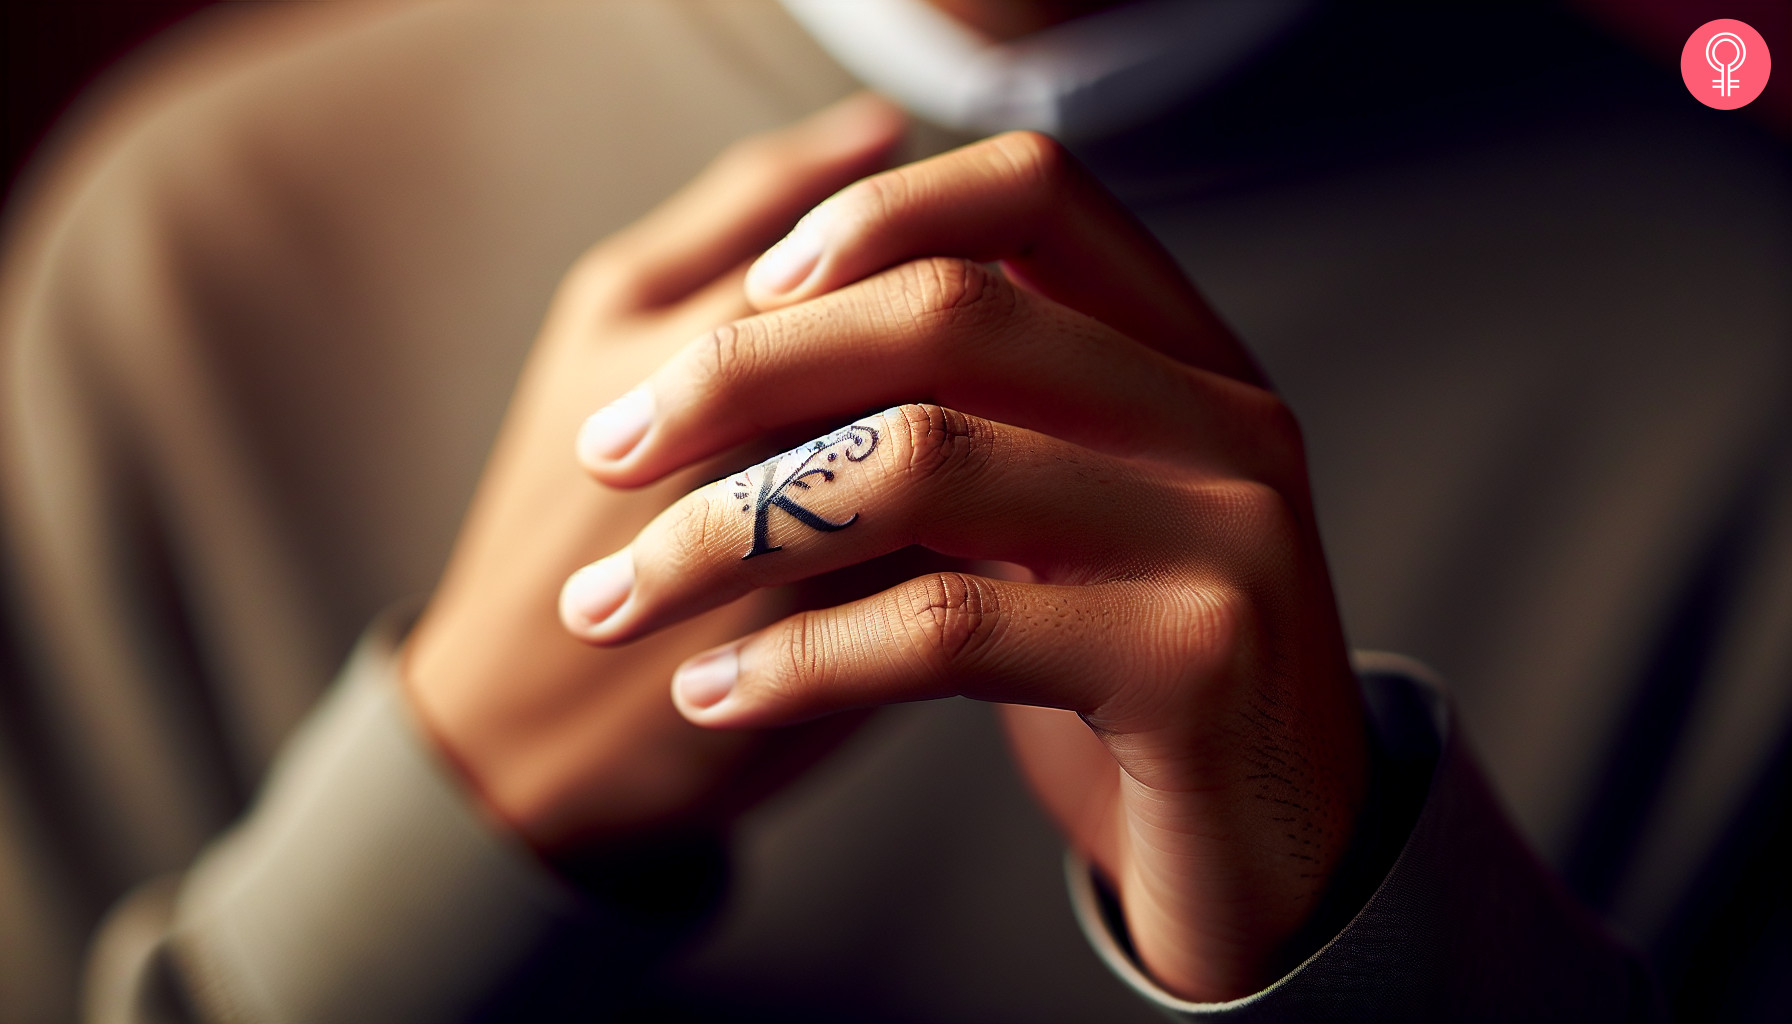 Woman with finger initial tattoo